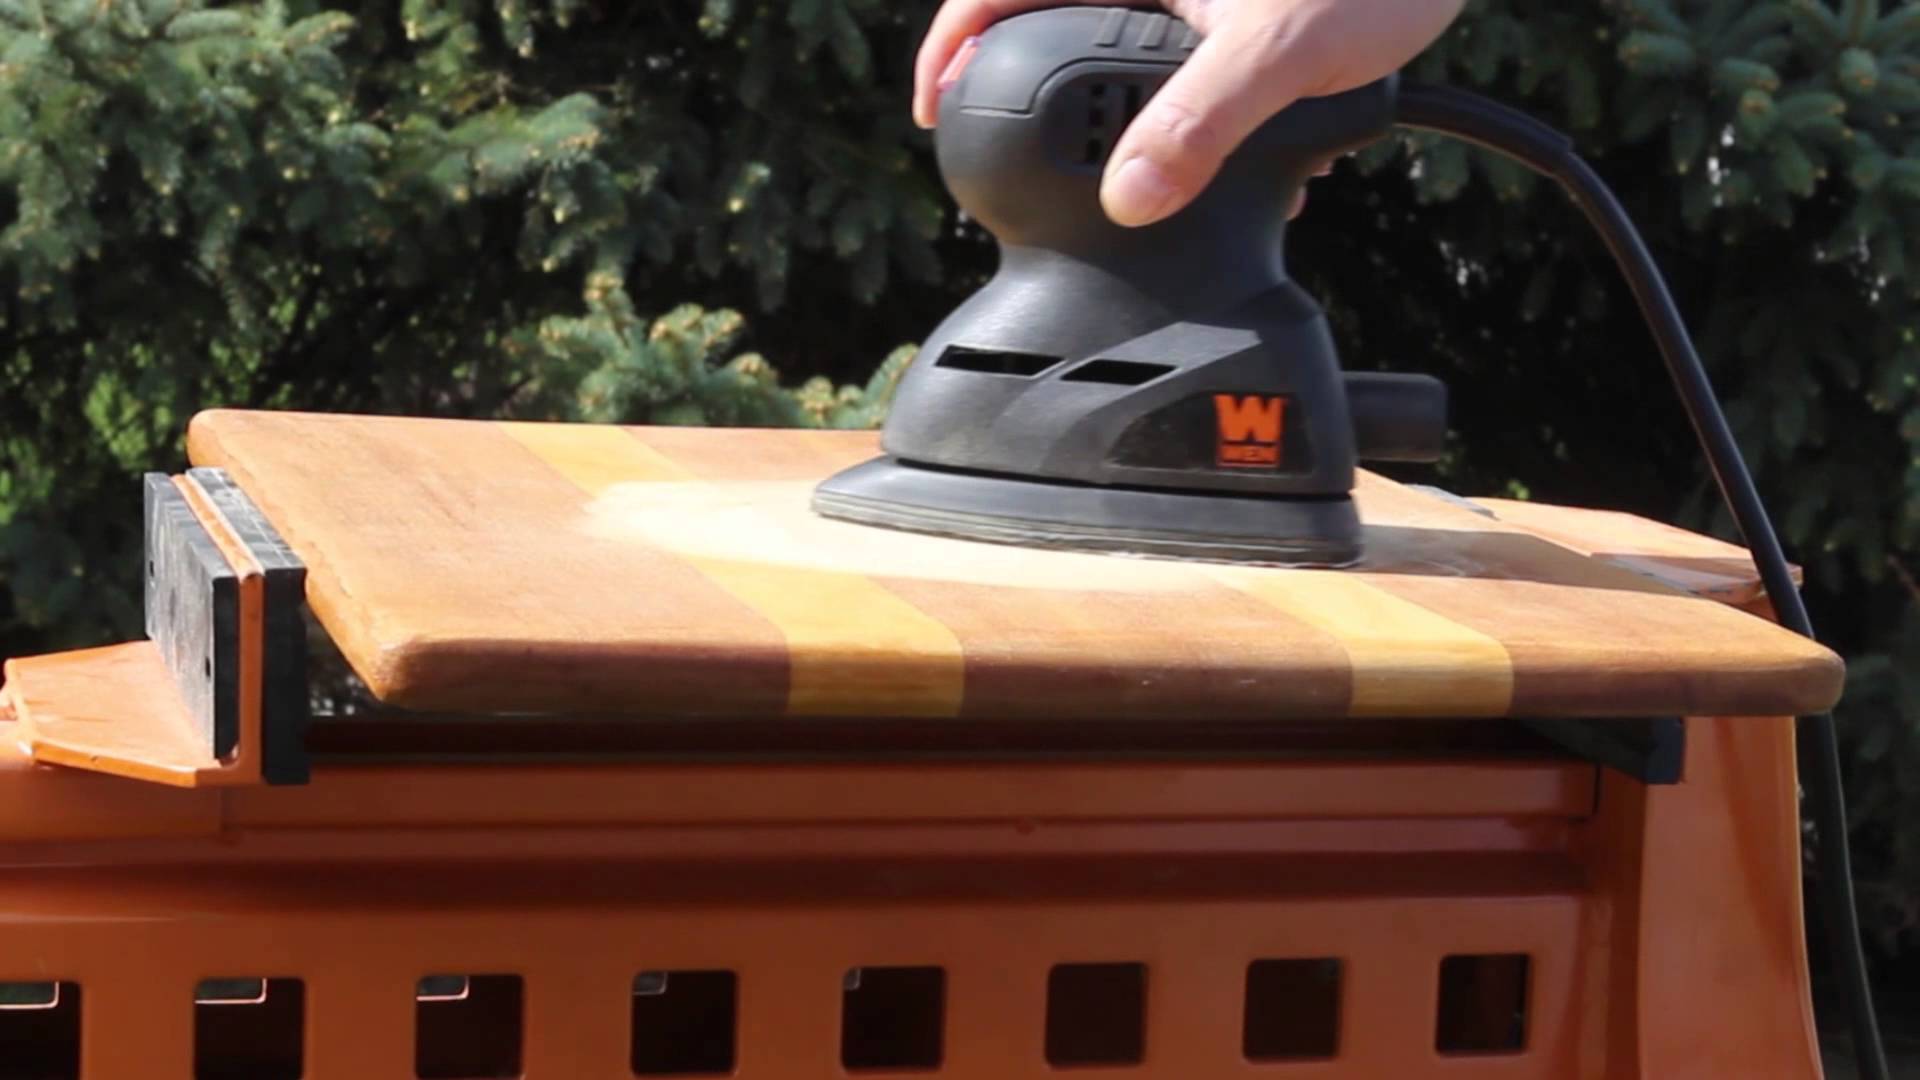 Features To Look For When Buying A Sander